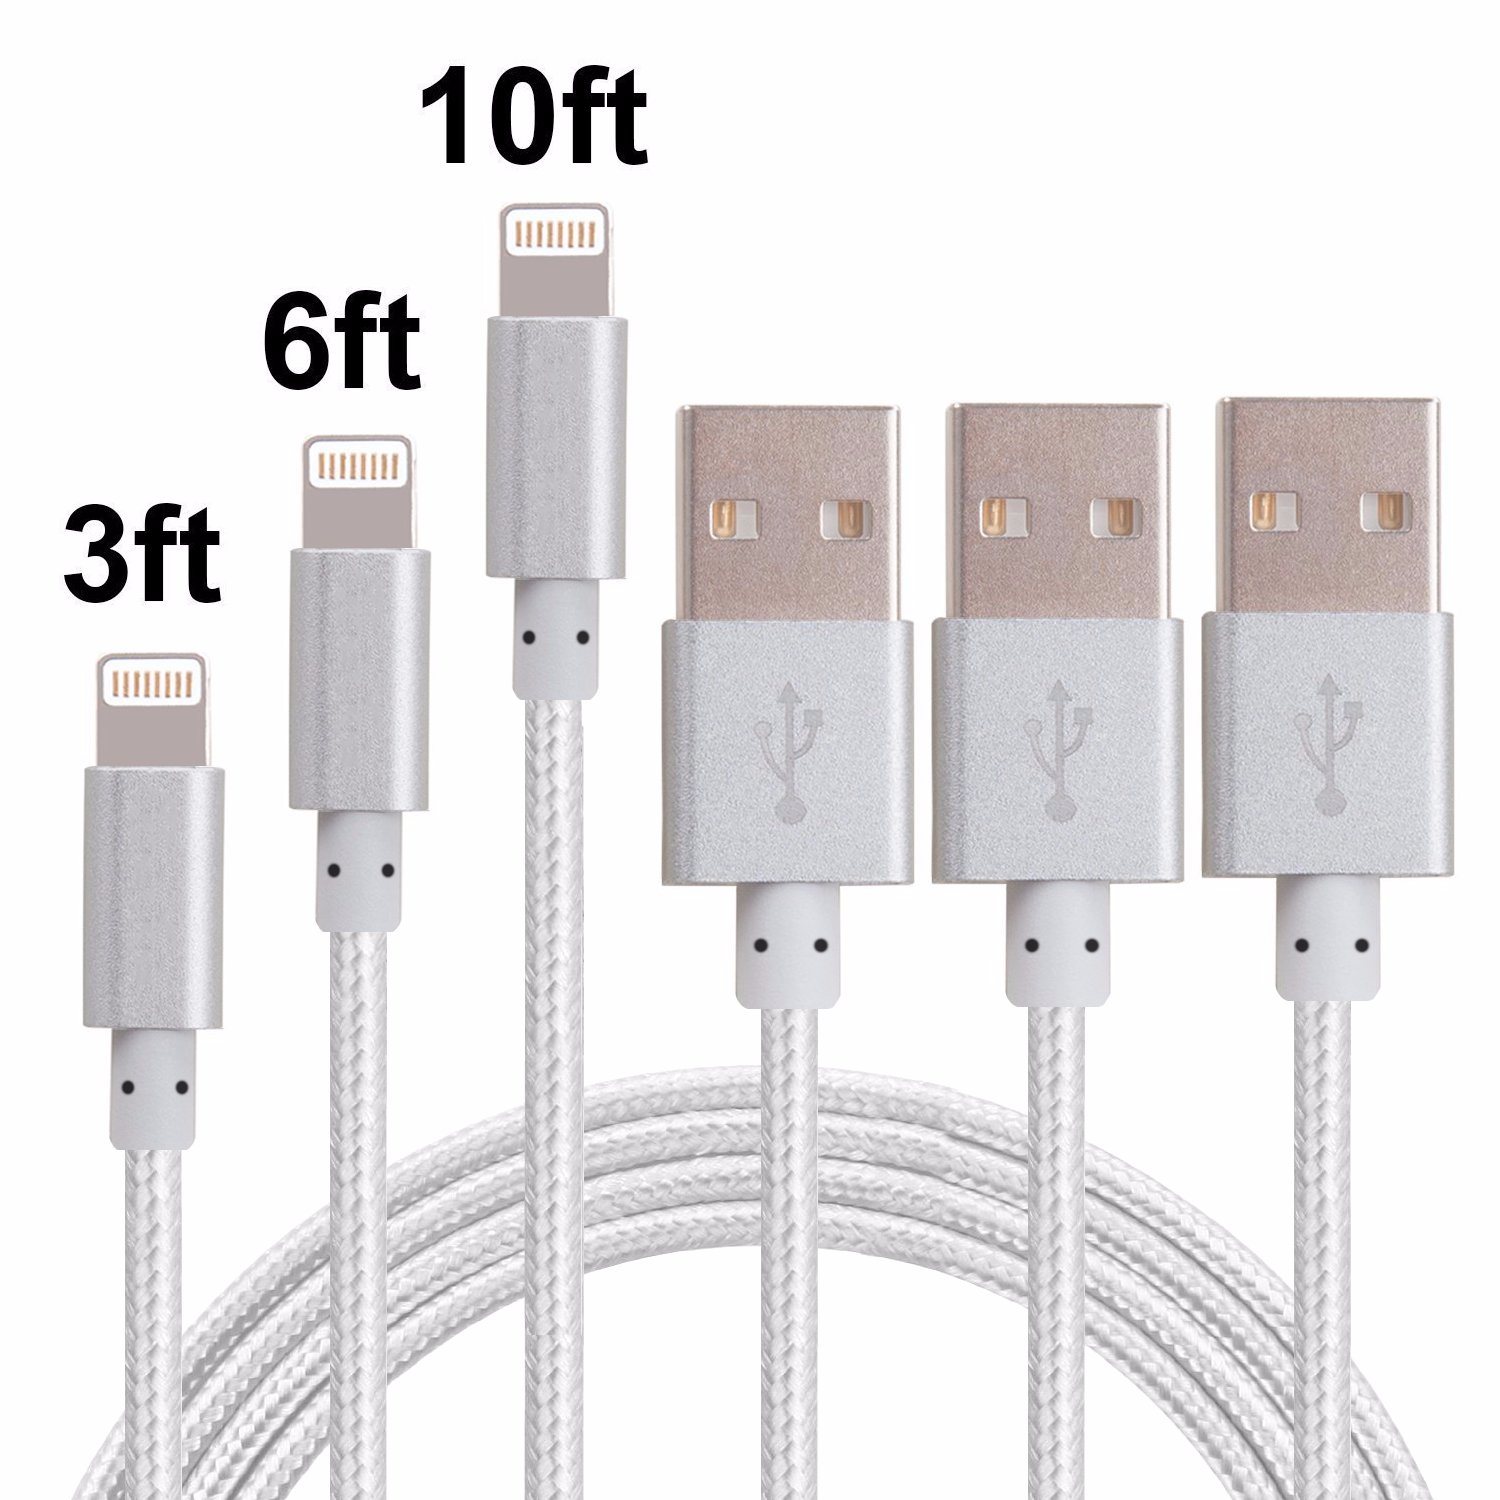 3FT Nylon Braided 8 Pin Lightning Cable Cord USB Charging Cable Charger for iPhone